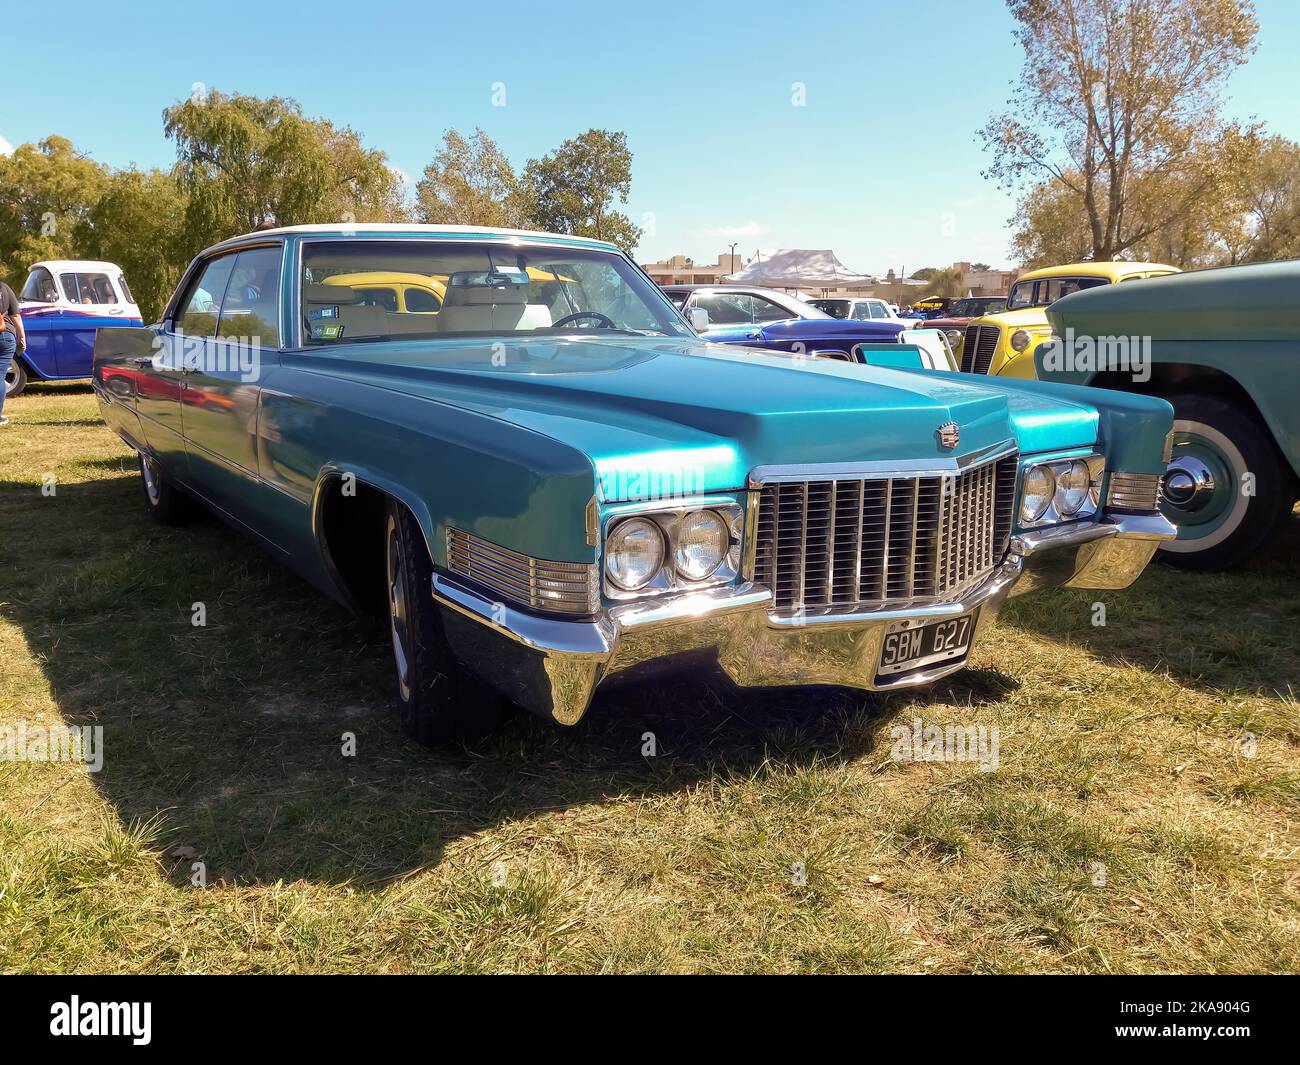 Chascomus, Argentina - Apr 9, 2022 - Old blue luxury Cadillac DeVille sedan four door 1970 in the countryside. Nature, grass, trees. Classic car show. Stock Photo